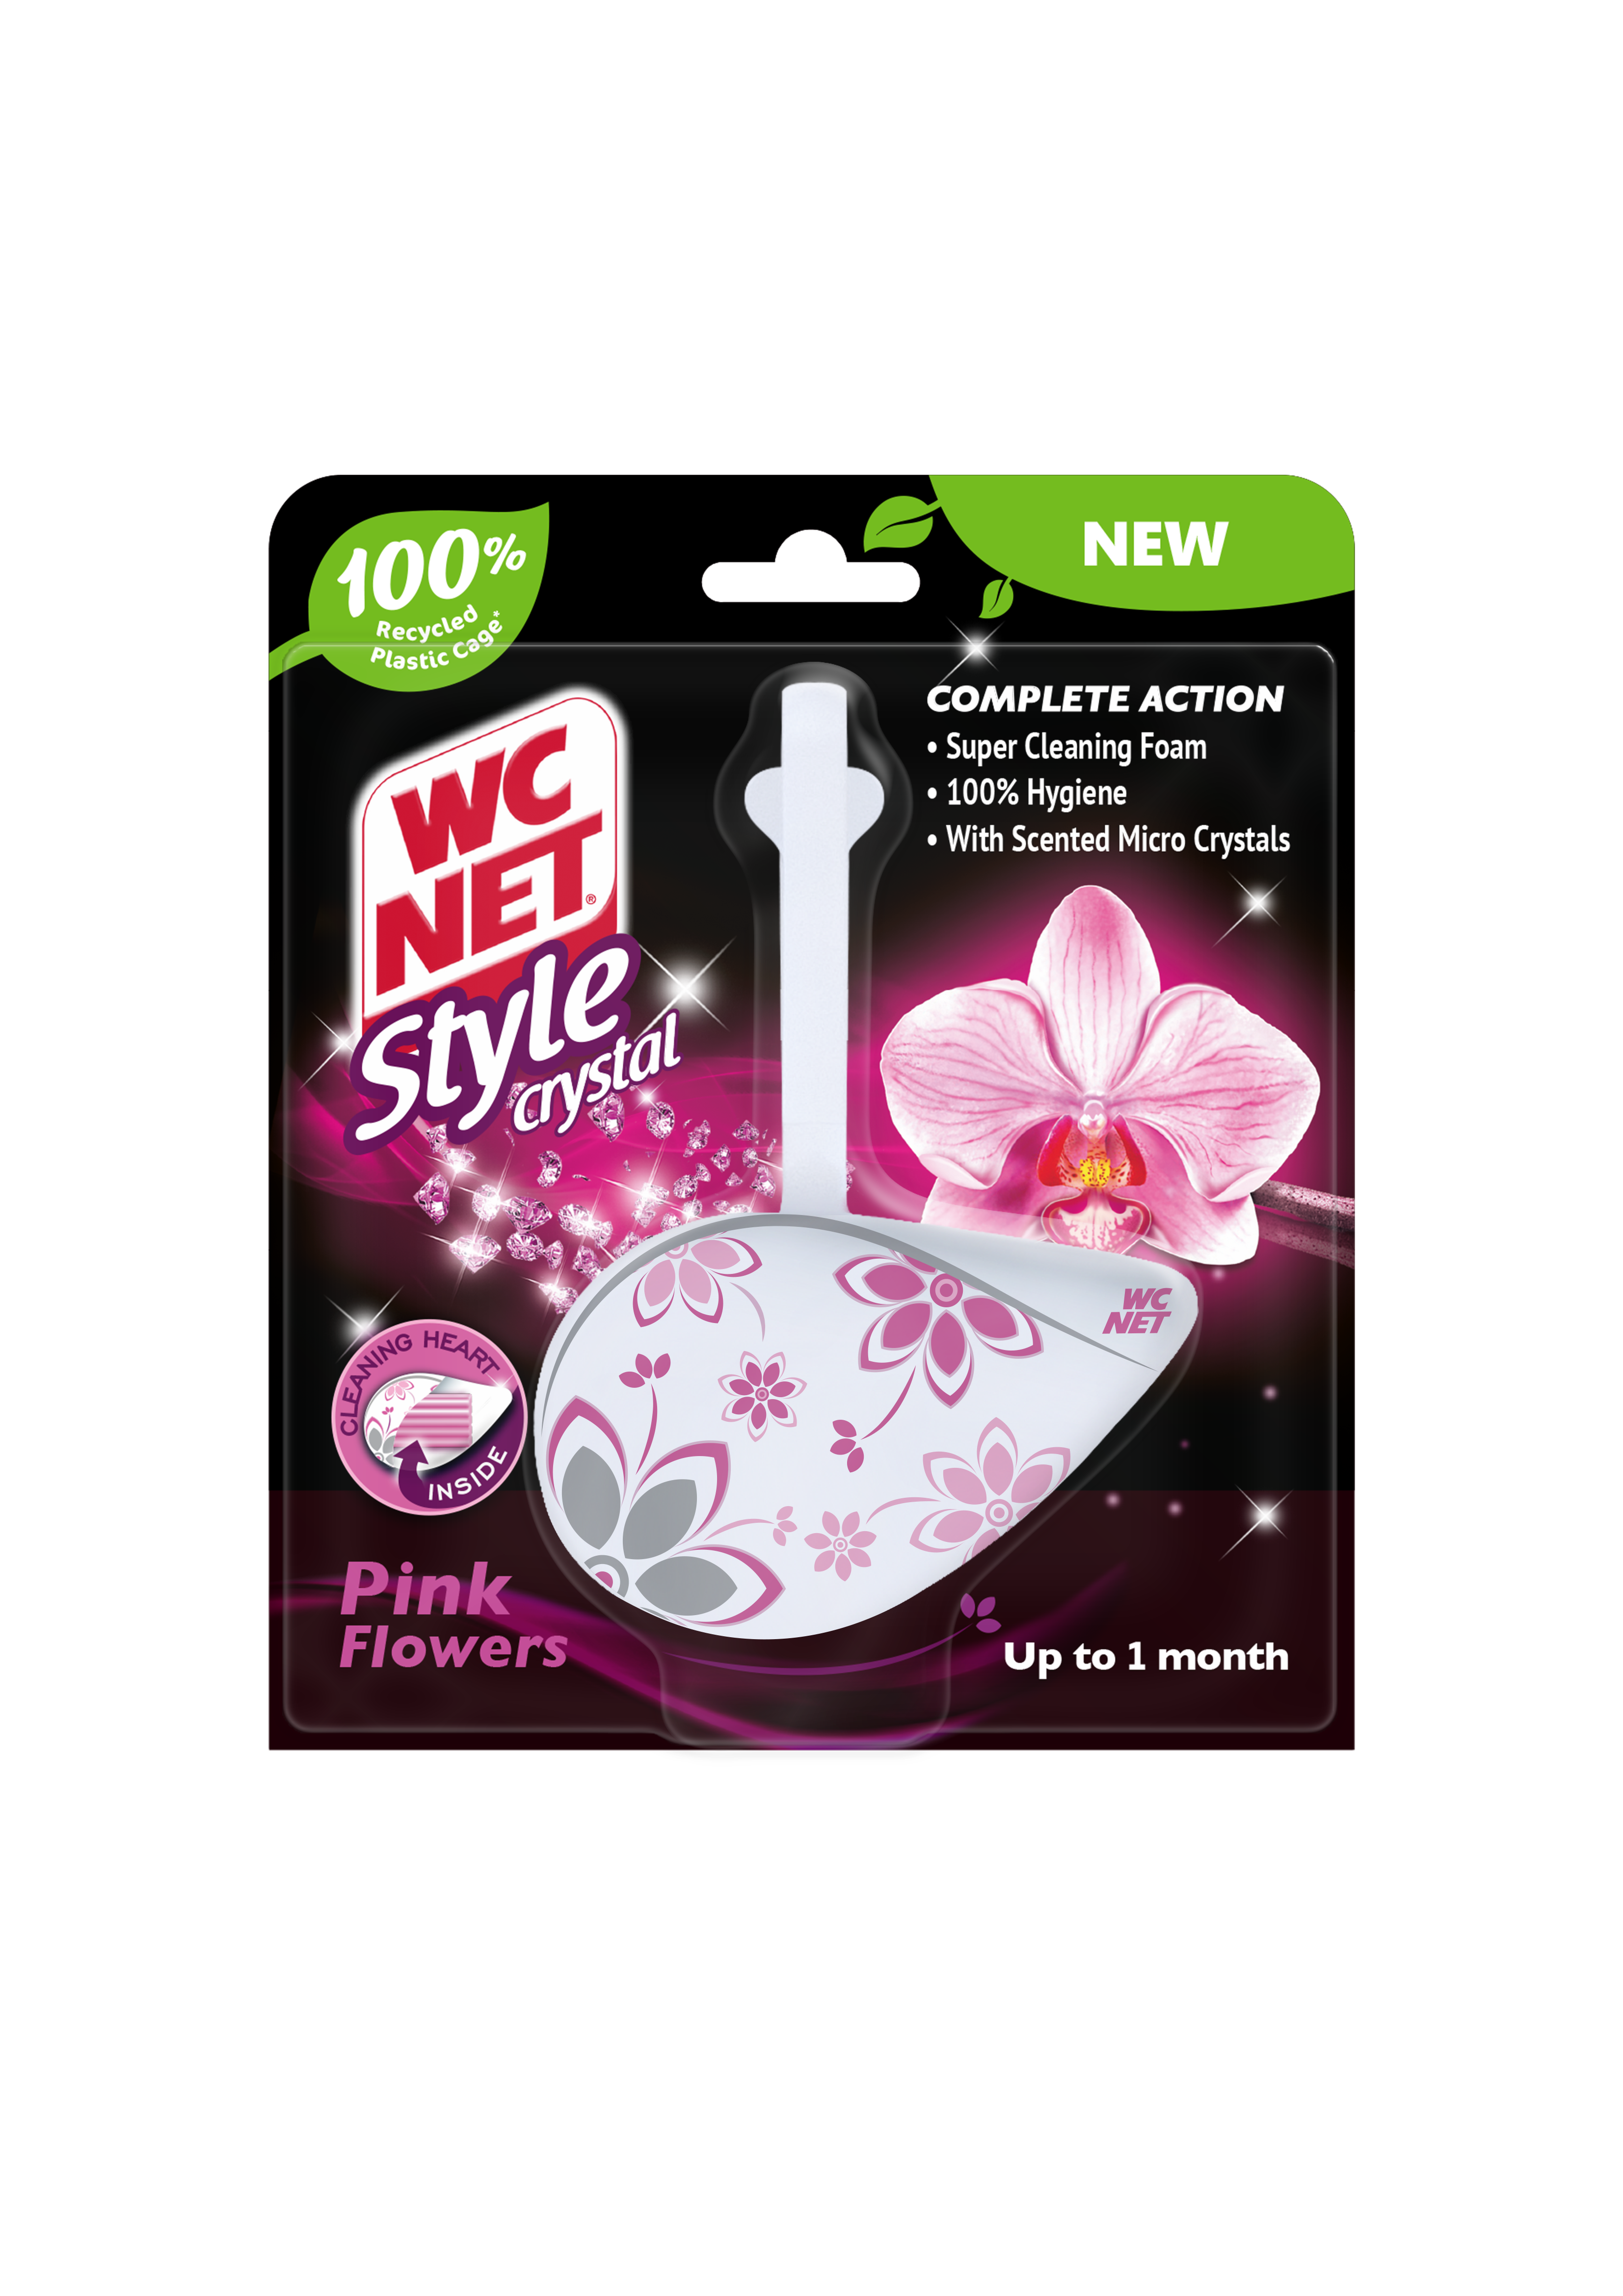 WC NET STYLE CRYSTAL Pink Flowers